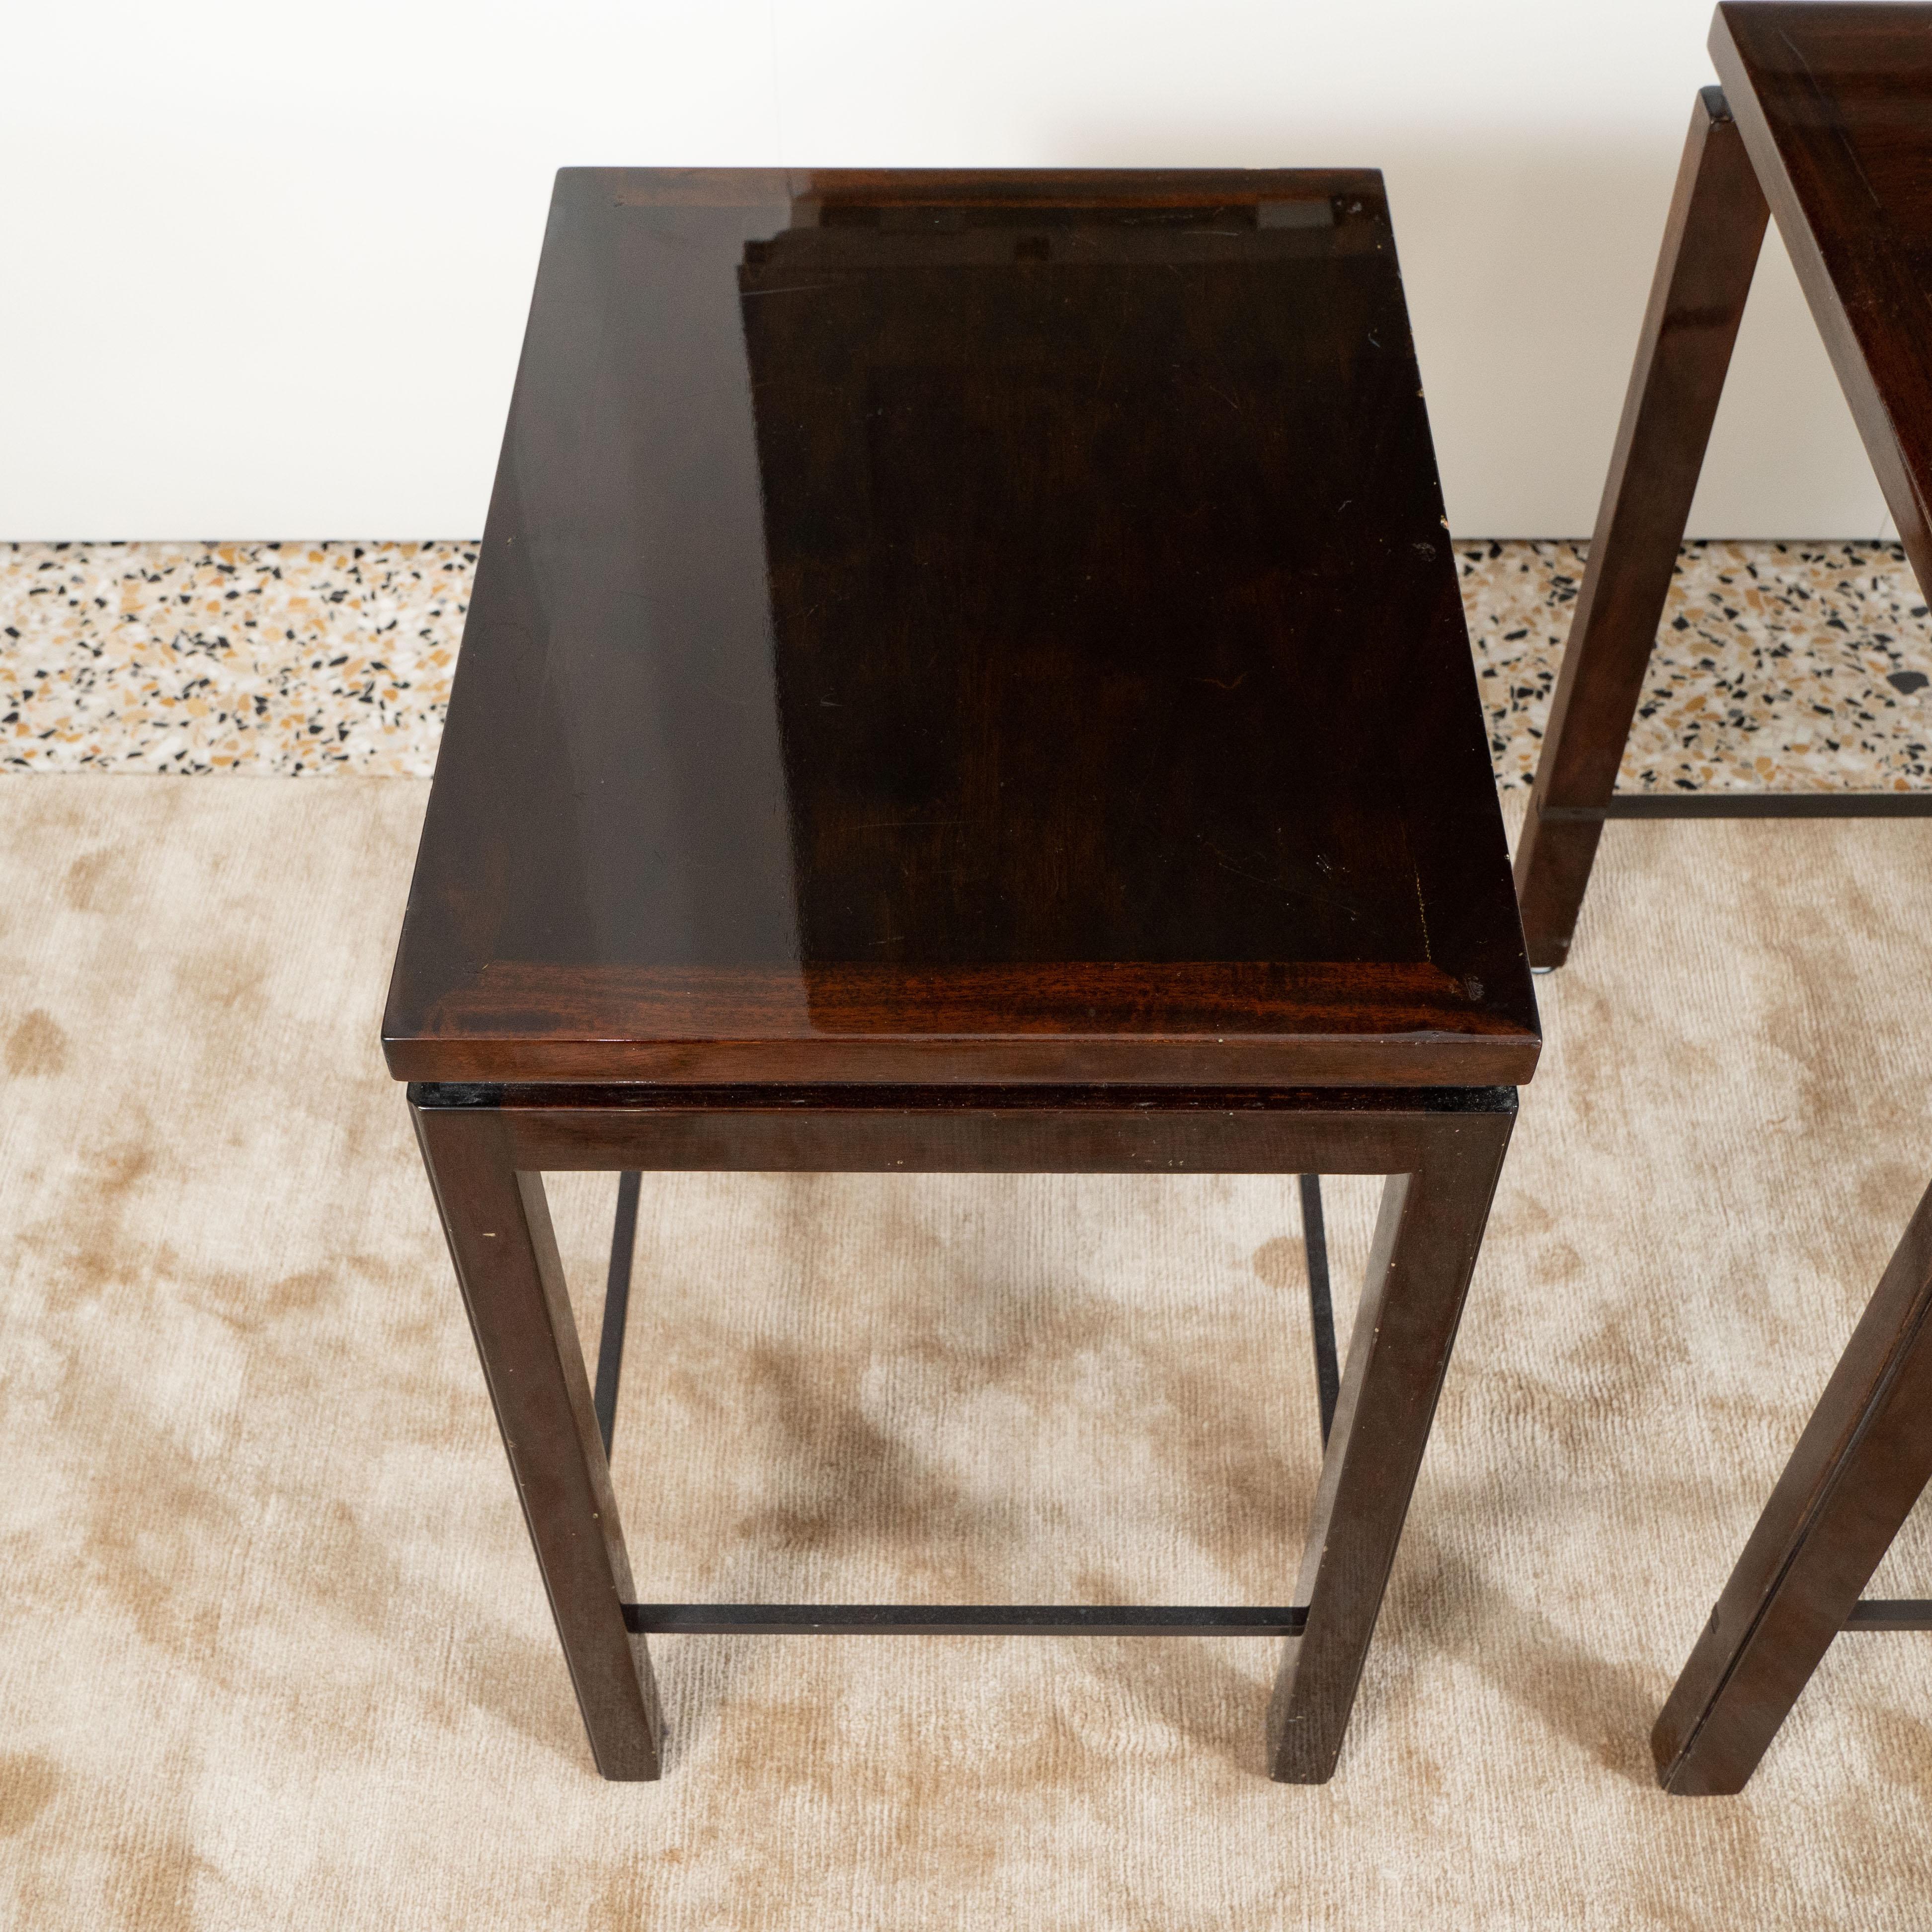 Mid-20th Century Dunbar Janus Set of 3 Nesting Tables by Edward Wormley from Alan Moss